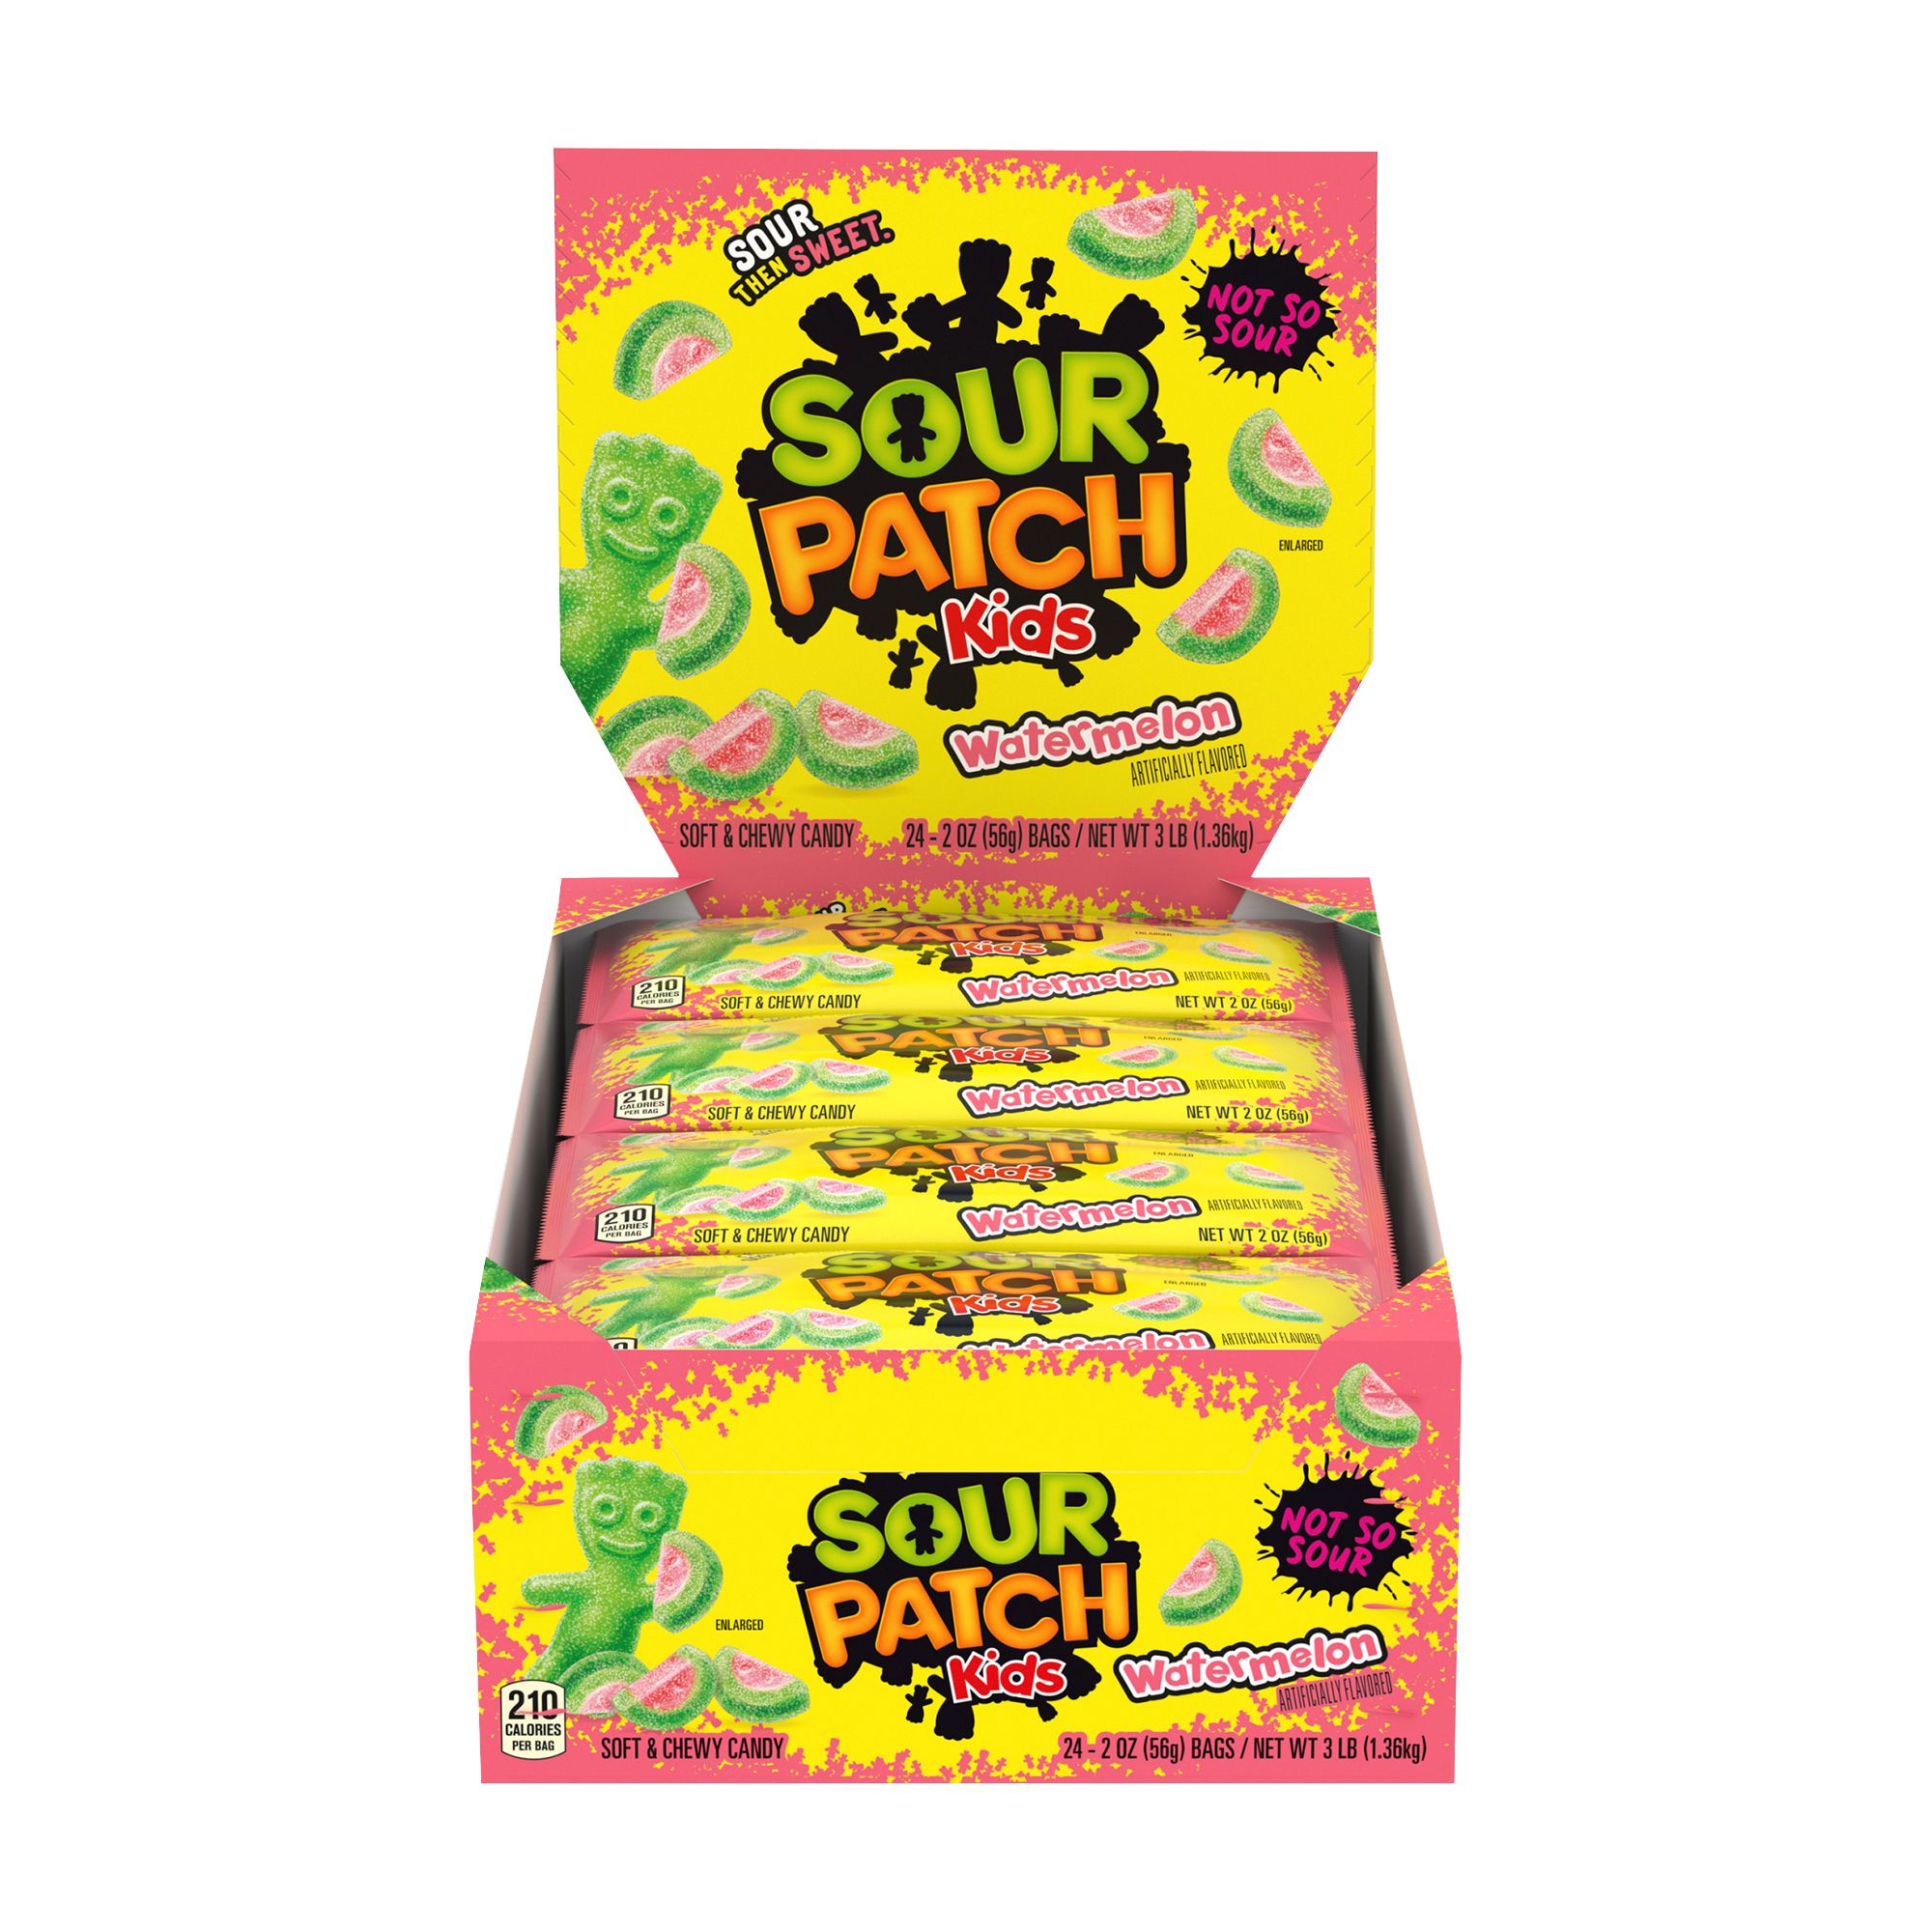 Sour Patch Kids Watermelon Soft & Chewy Candy, 24 pk.